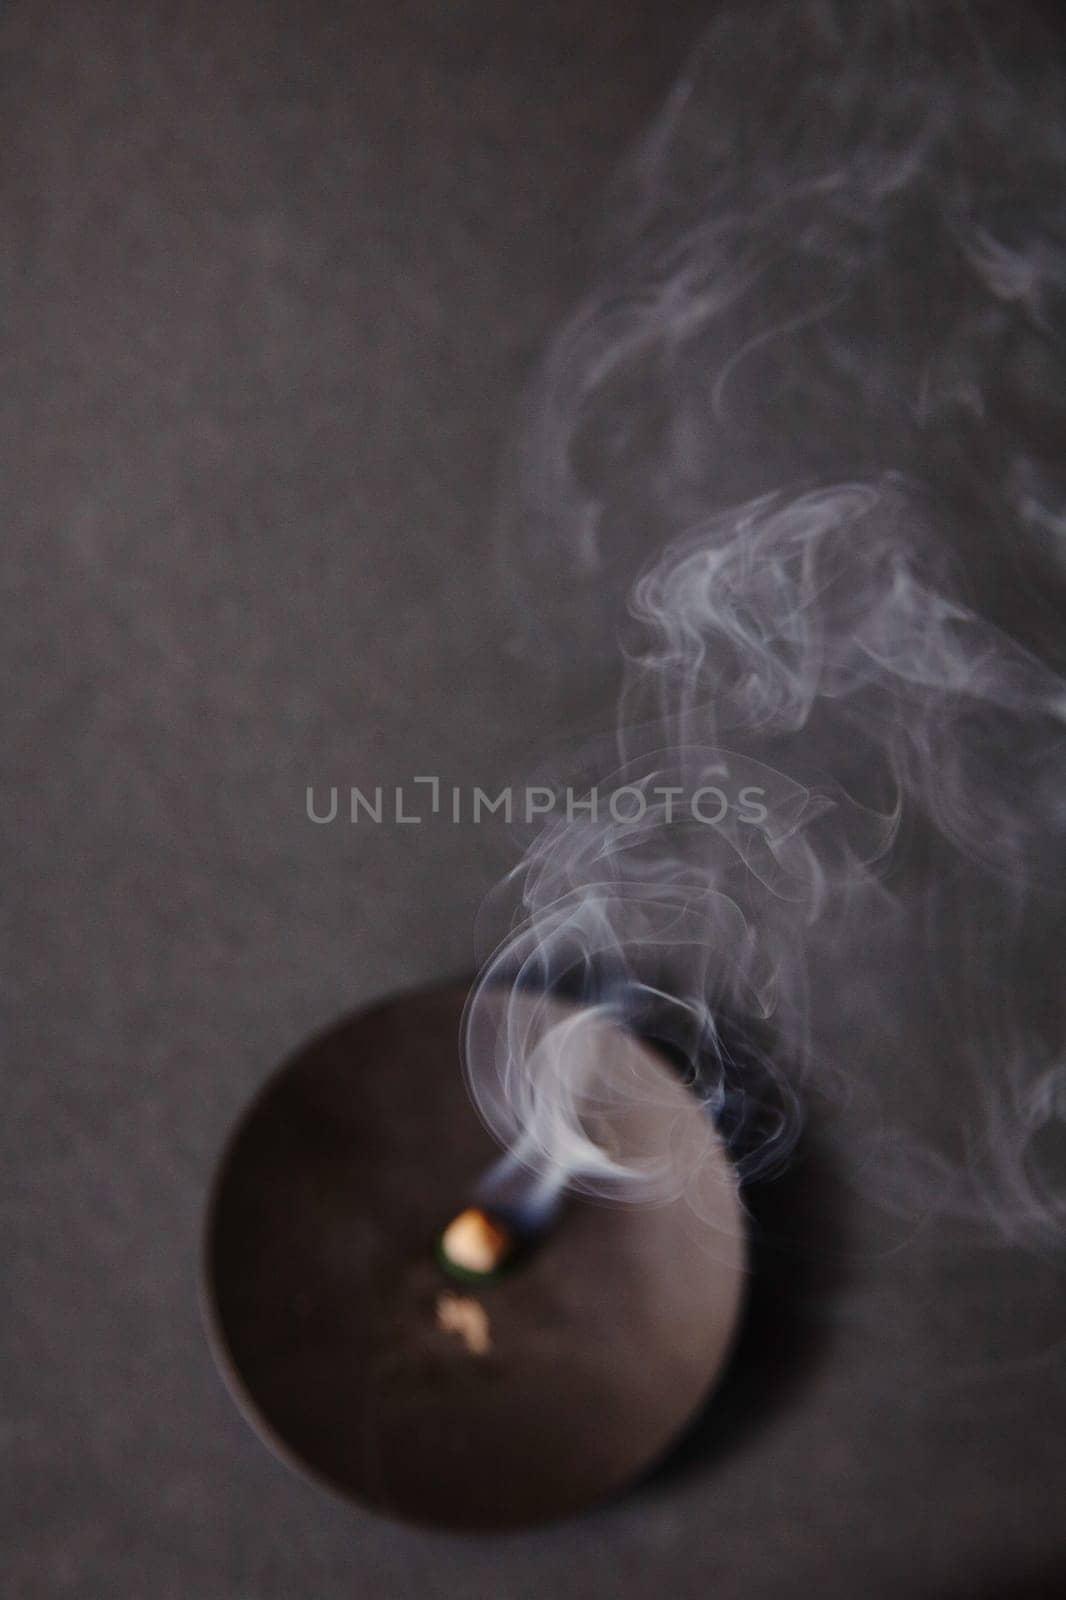 A serene scene from above of incense with wisps of smoke, symbolizing completion and fleeting inspiration.